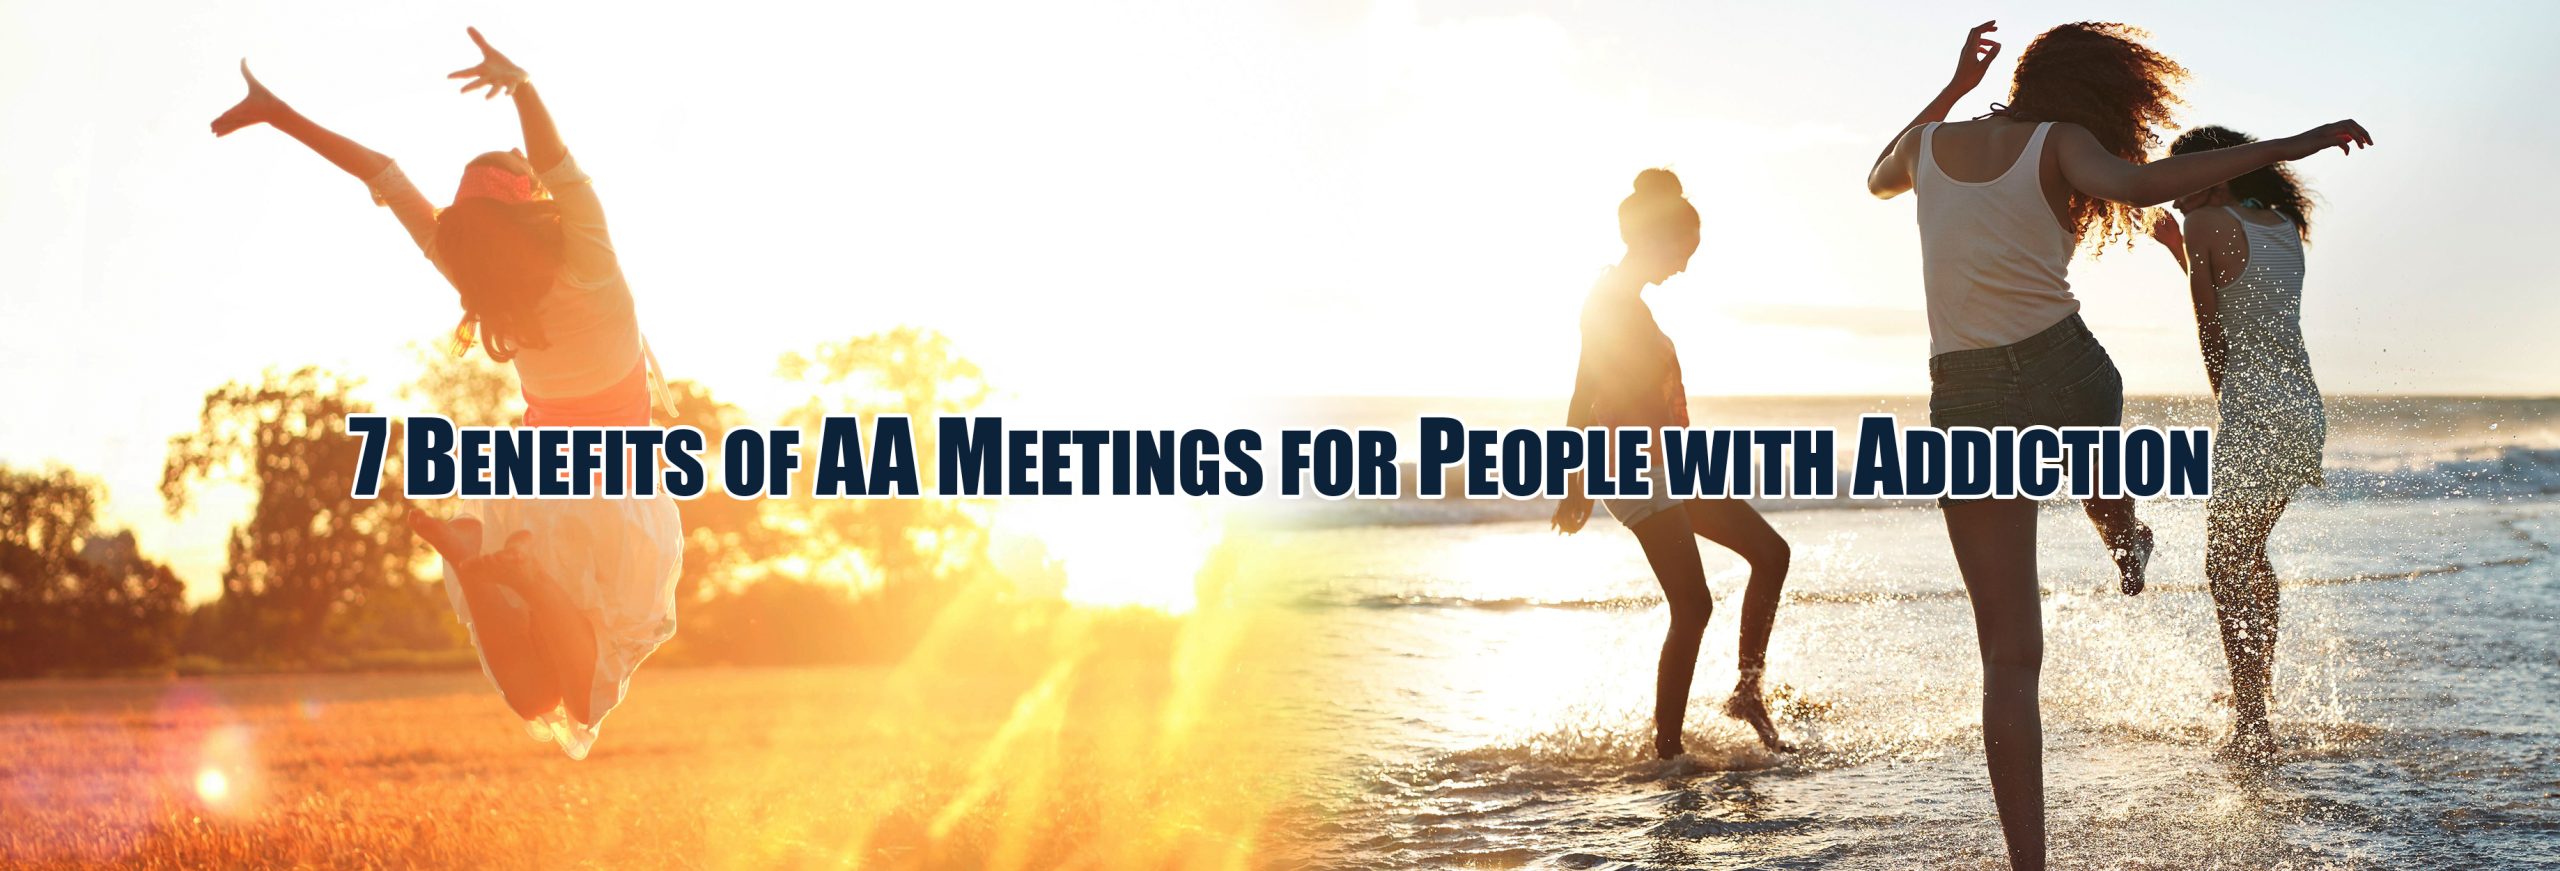 7 Benefits of AA Meetings For People with Addictions